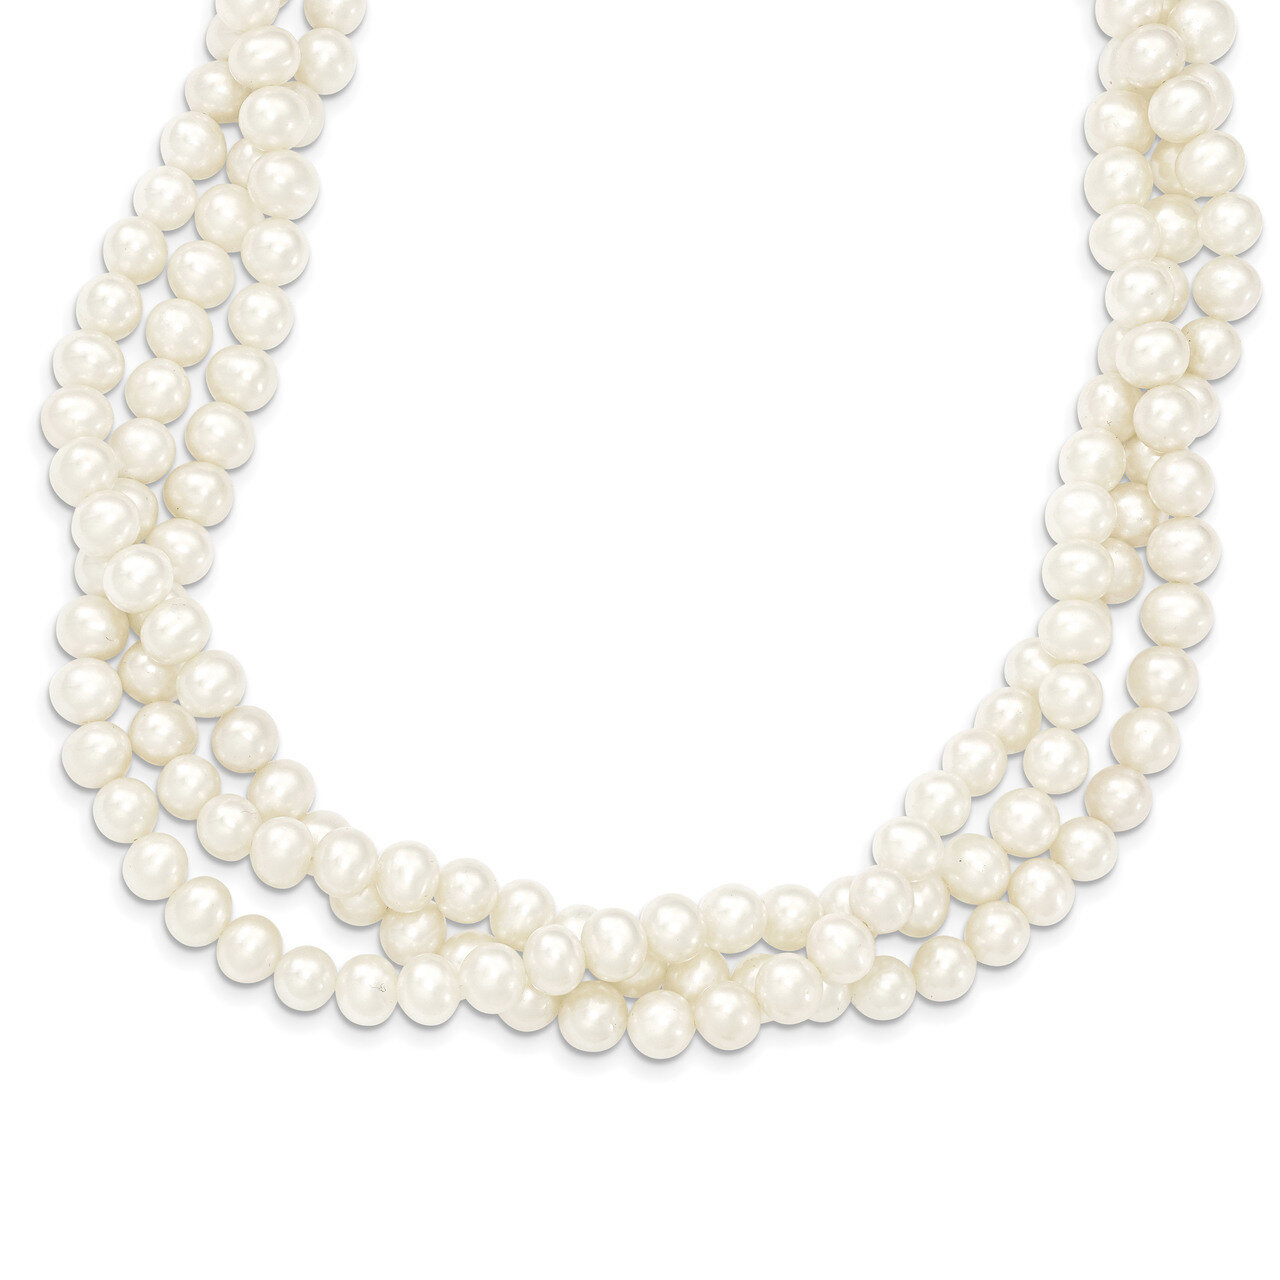 21 Inch 6-7mm White Fresh Water Cultured 3-Strand Pearl Necklace 14k Gold XF553-21